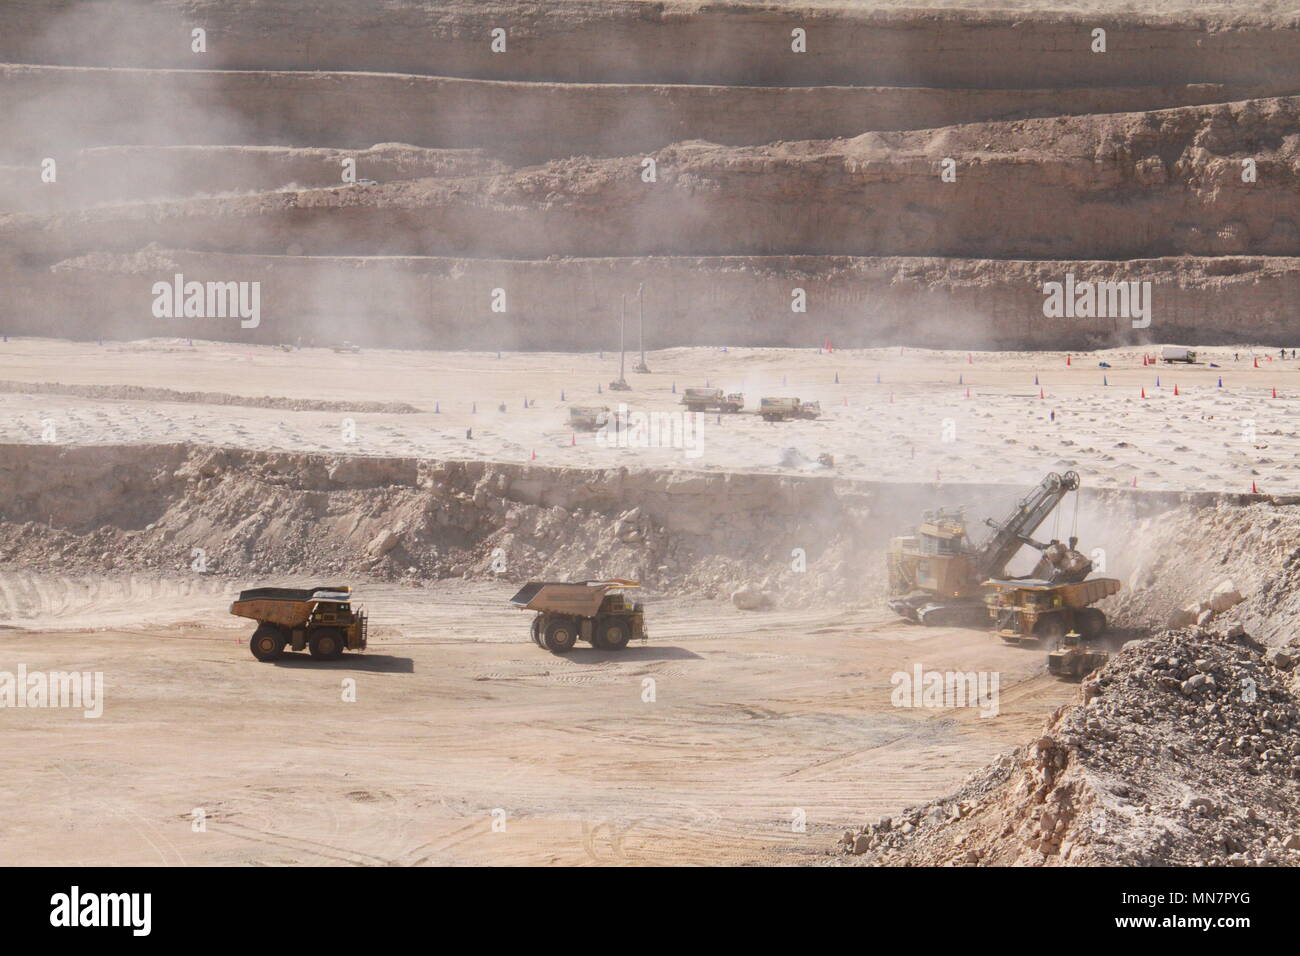 Swakopmund. 11th May, 2018. Photo taken on May 11, 2018 shows haul trucks working at Husab Uranium Mine in western Namibia. The Husab mine is one of the biggest uranium mines in the world. Credit: Wu Changwei/Xinhua/Alamy Live News Stock Photo